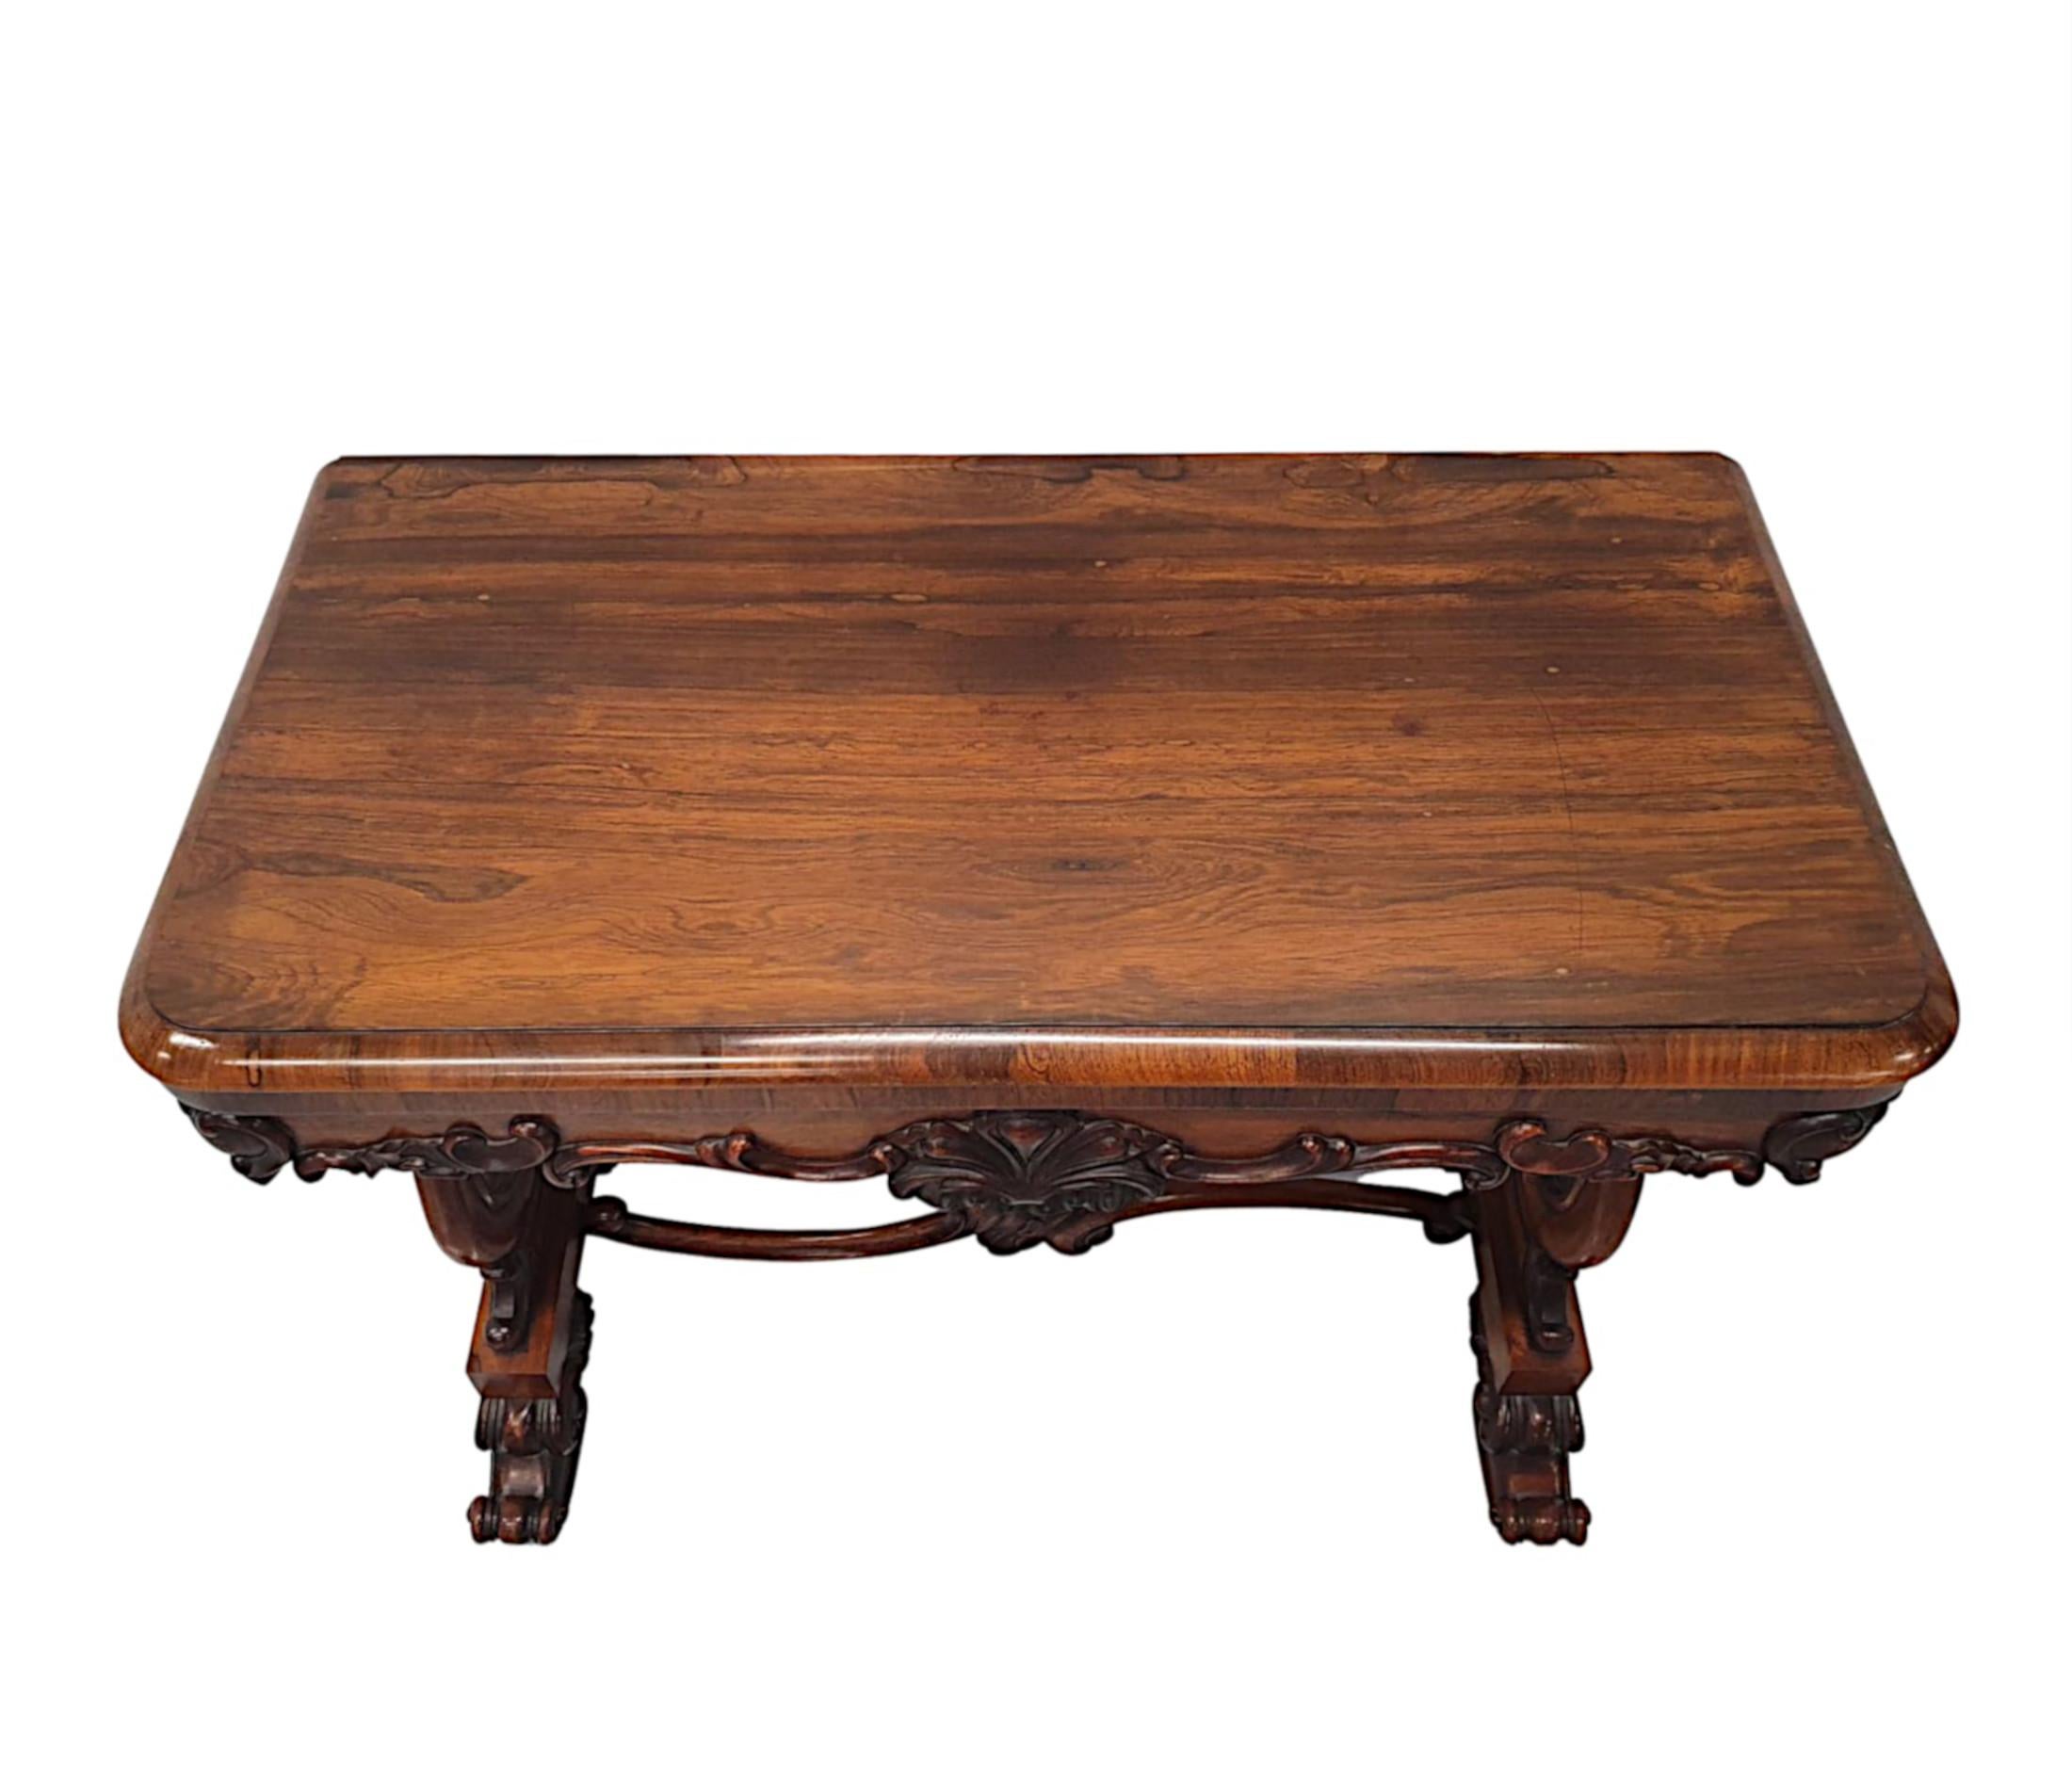 Rare and Unusual Early 19th Century Turn over Leaf Card Table For Sale 2